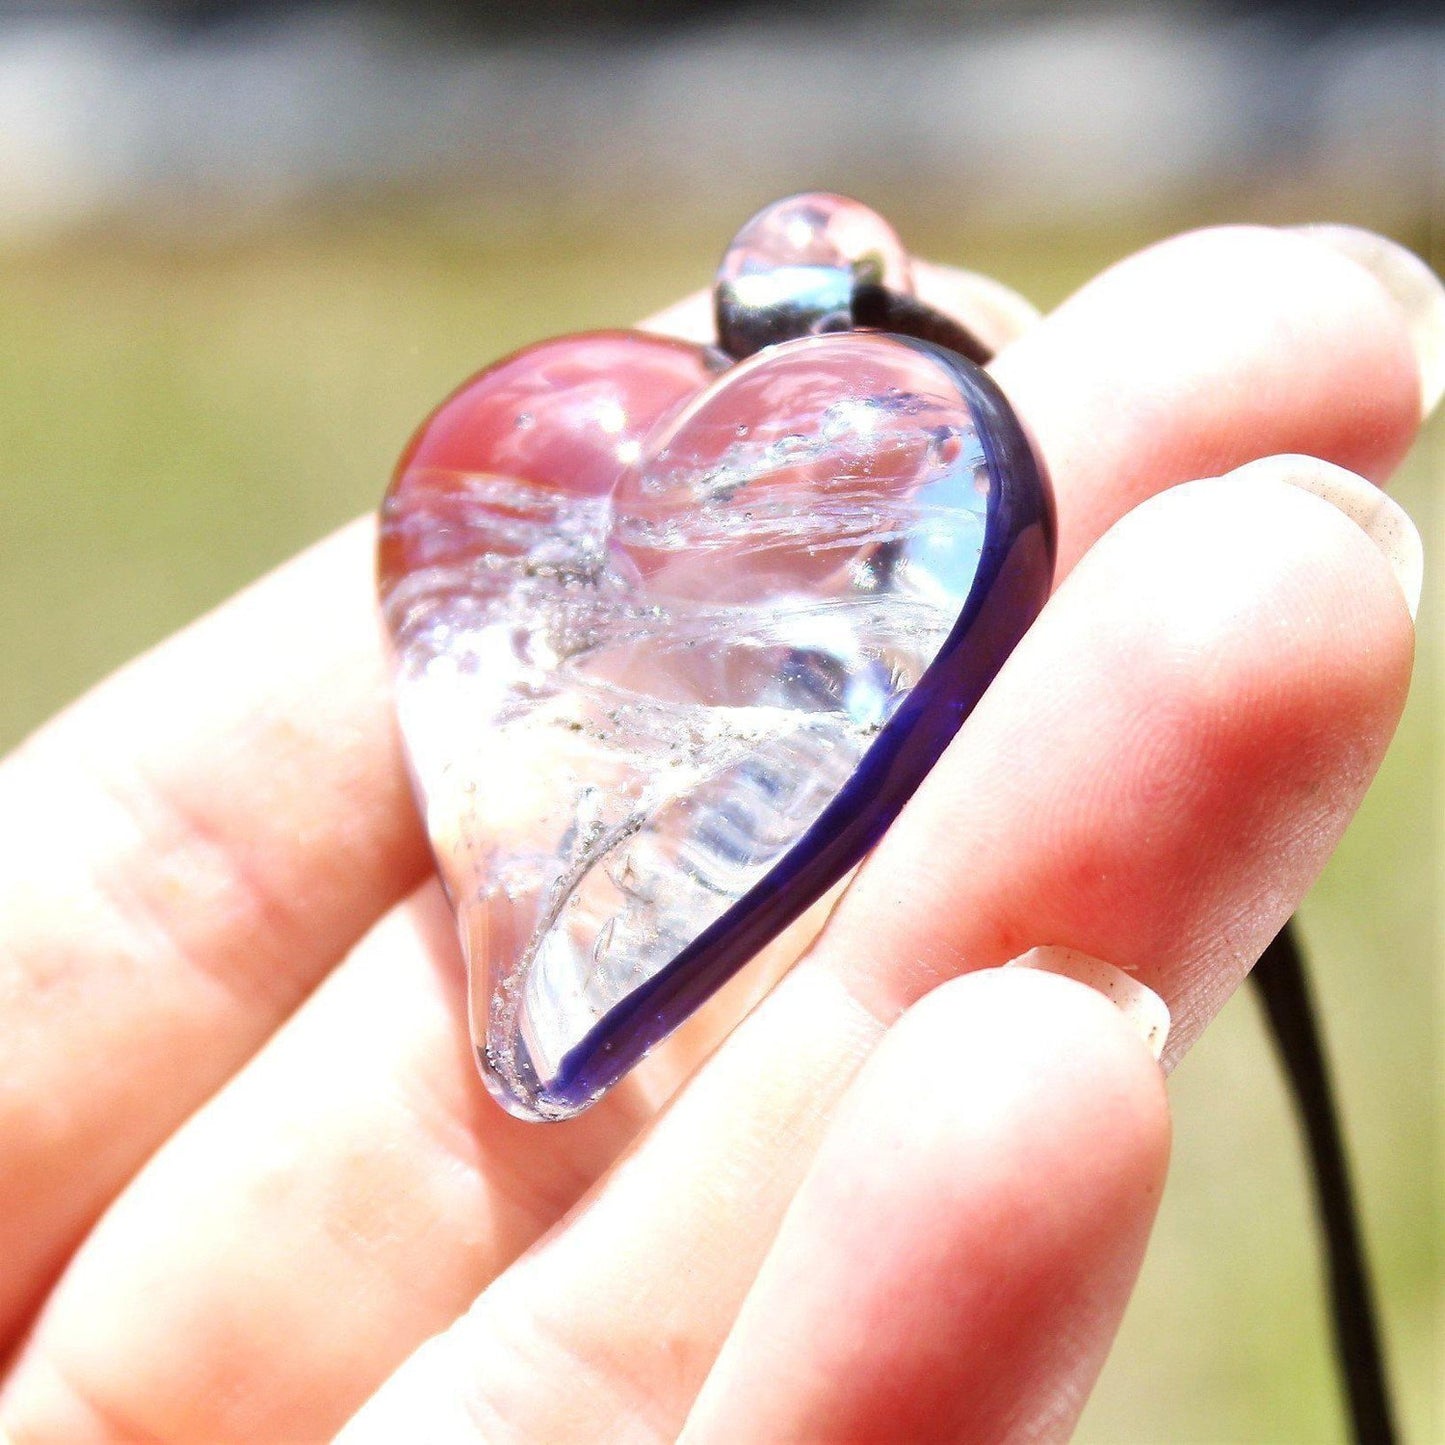 Forever In My Heart - Cremation Jewelry Pendant